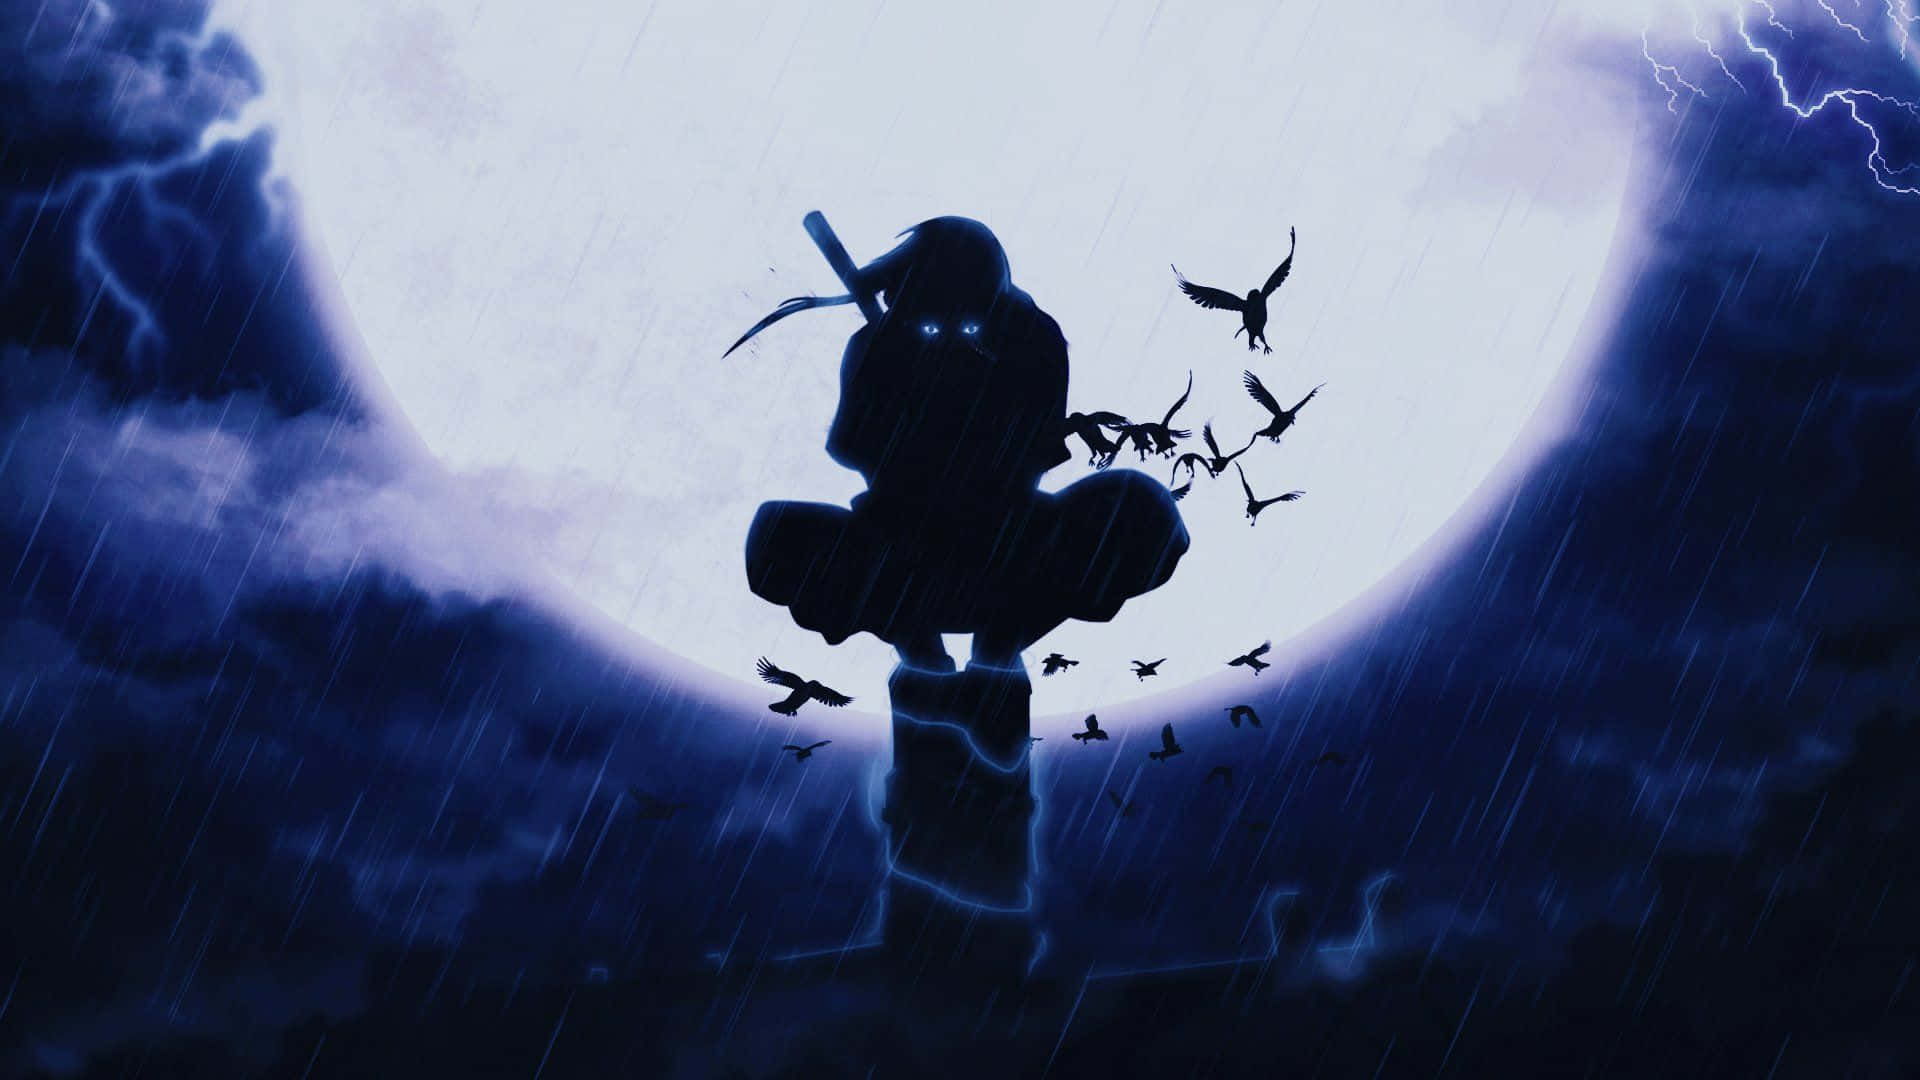 Itachi Aesthetic Sitting On Tall Stone With Crows Flying Around Wallpaper